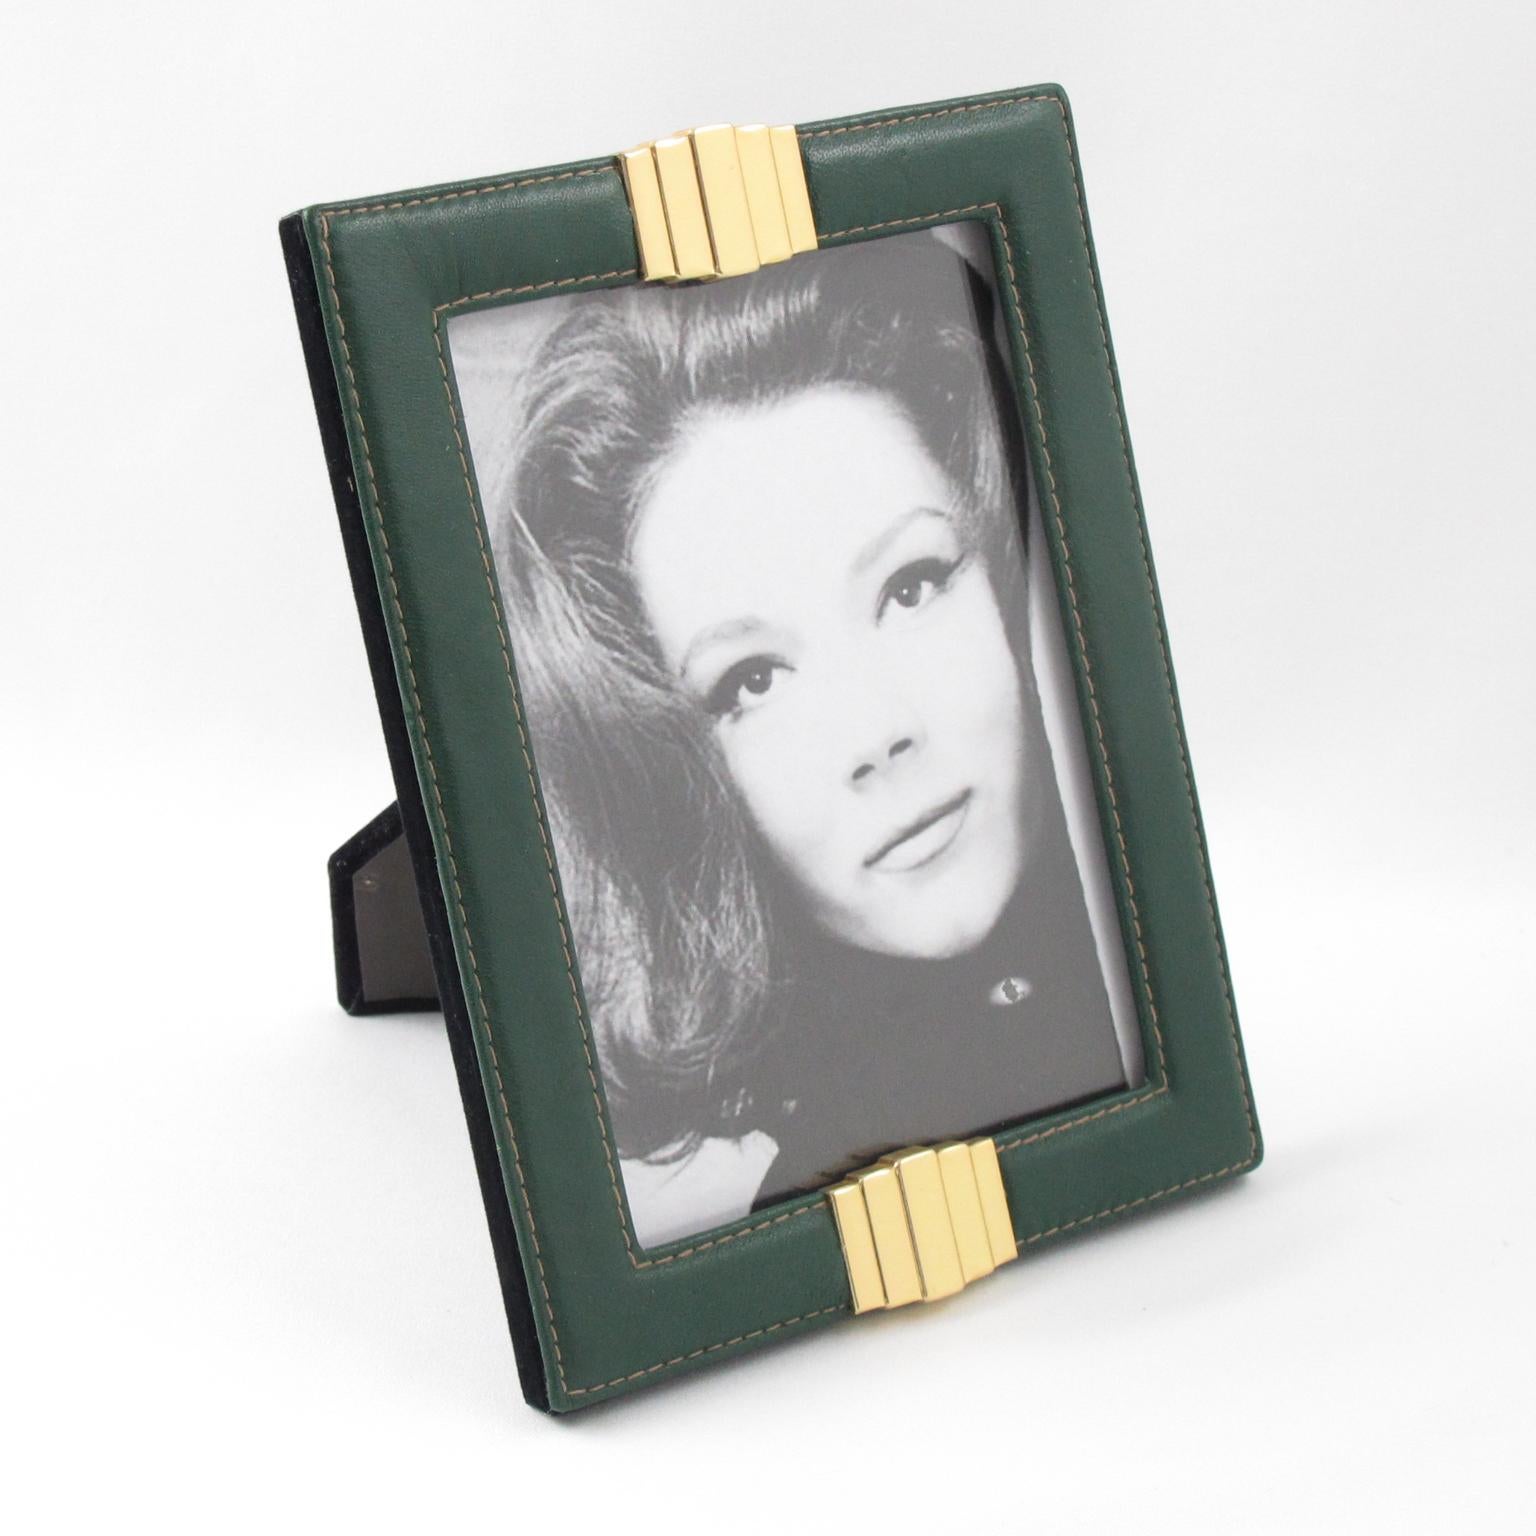 Elegant 1970s French picture photo frame. Forest green leather with pattern and hand-stitched detailing compliment with gilded brass ornament. Easel and back in black velvet and glass protection. The frame can be placed in portrait or in landscape